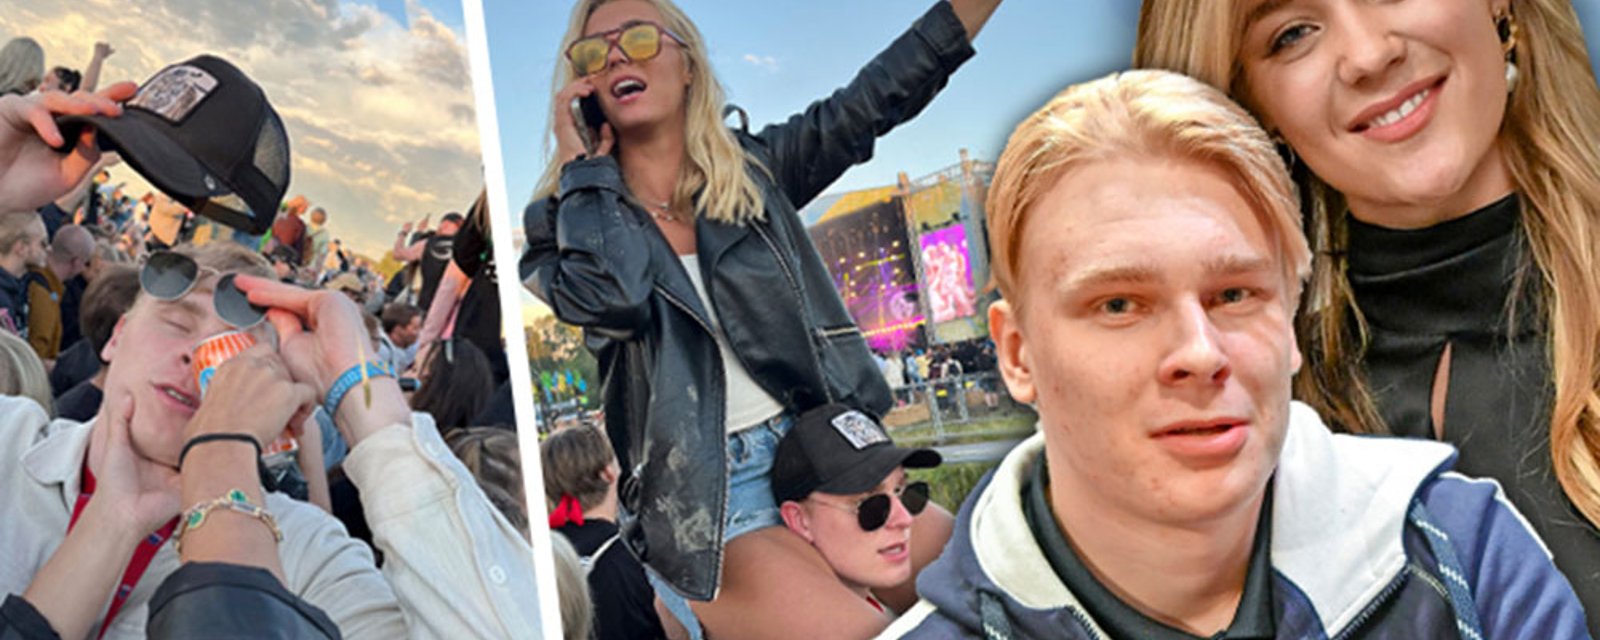 Kaapo Kakko kicks off his offseason by getting drunk with models and actors